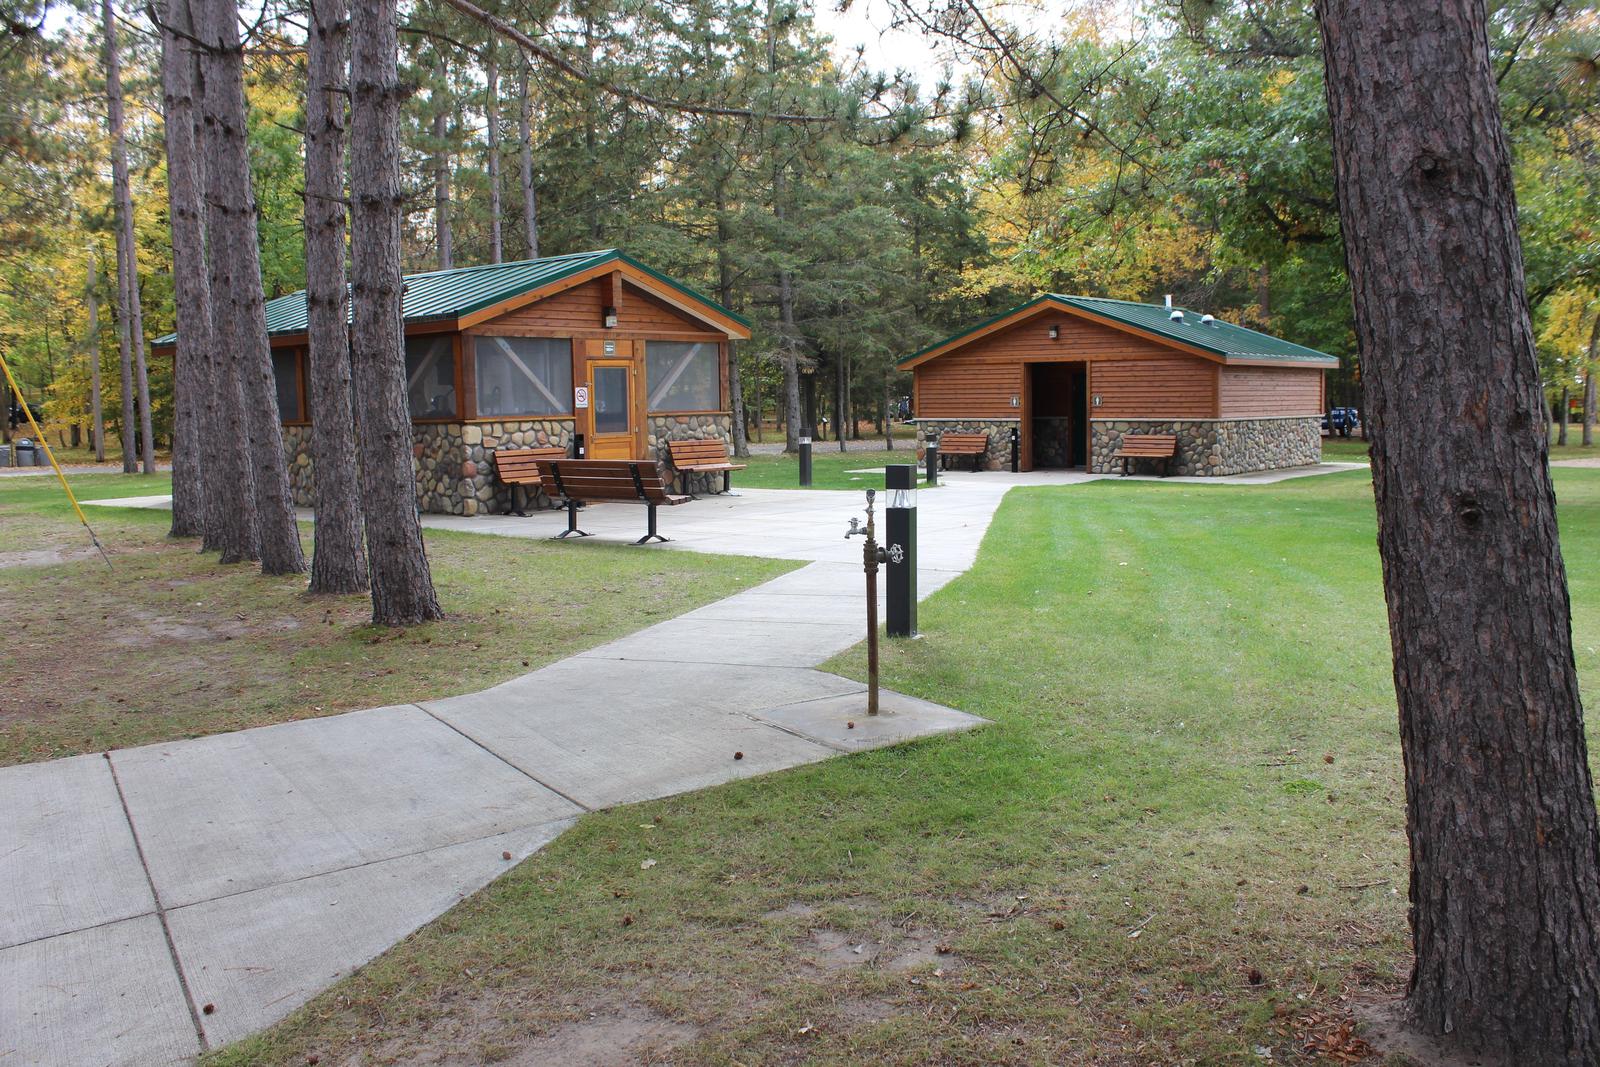 Leech Lake Fish Cleaning Station & RestroomsFish cleaning station and bathrooms